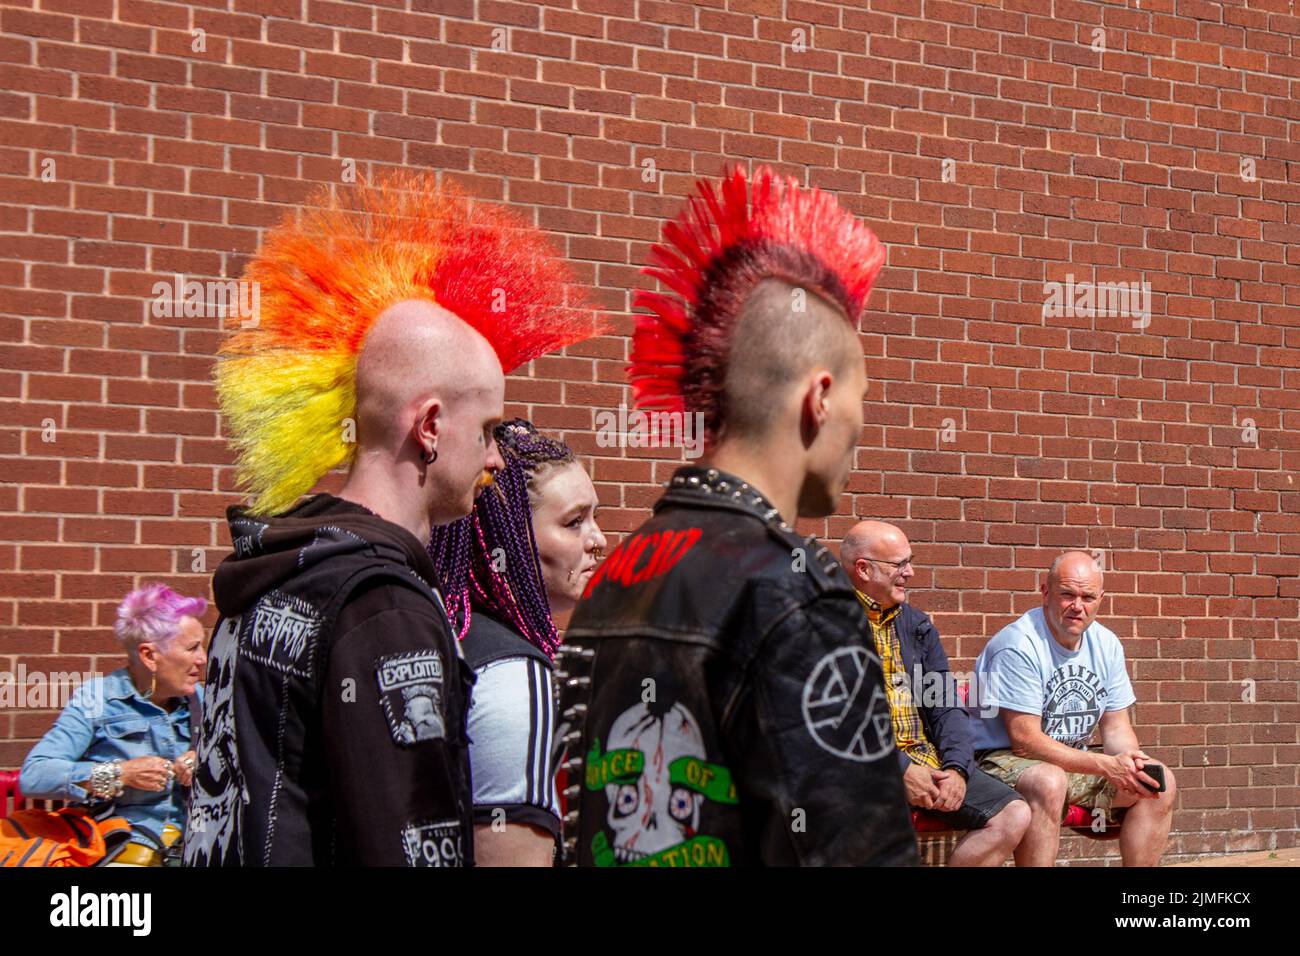 Blackpool, Lancashire, UK. 6th Aug 2022. The punk subculture, ideologies, fashion, with Mohican dyed hairstyles and colouring at the Punk Rebellion festival at The Winter Gardens. A protest against conventional attitudes and behaviour, a clash of anti-establishment cultures,  mohawks, safety pins and a load of attitude at the seaside town as punks attending the annual Rebellion rock music festival at the Winter Gardens come shoulder to shoulder with traditional holidaymakers.  Credit; MediaWorldImages/AlamyLiveNews Stock Photo